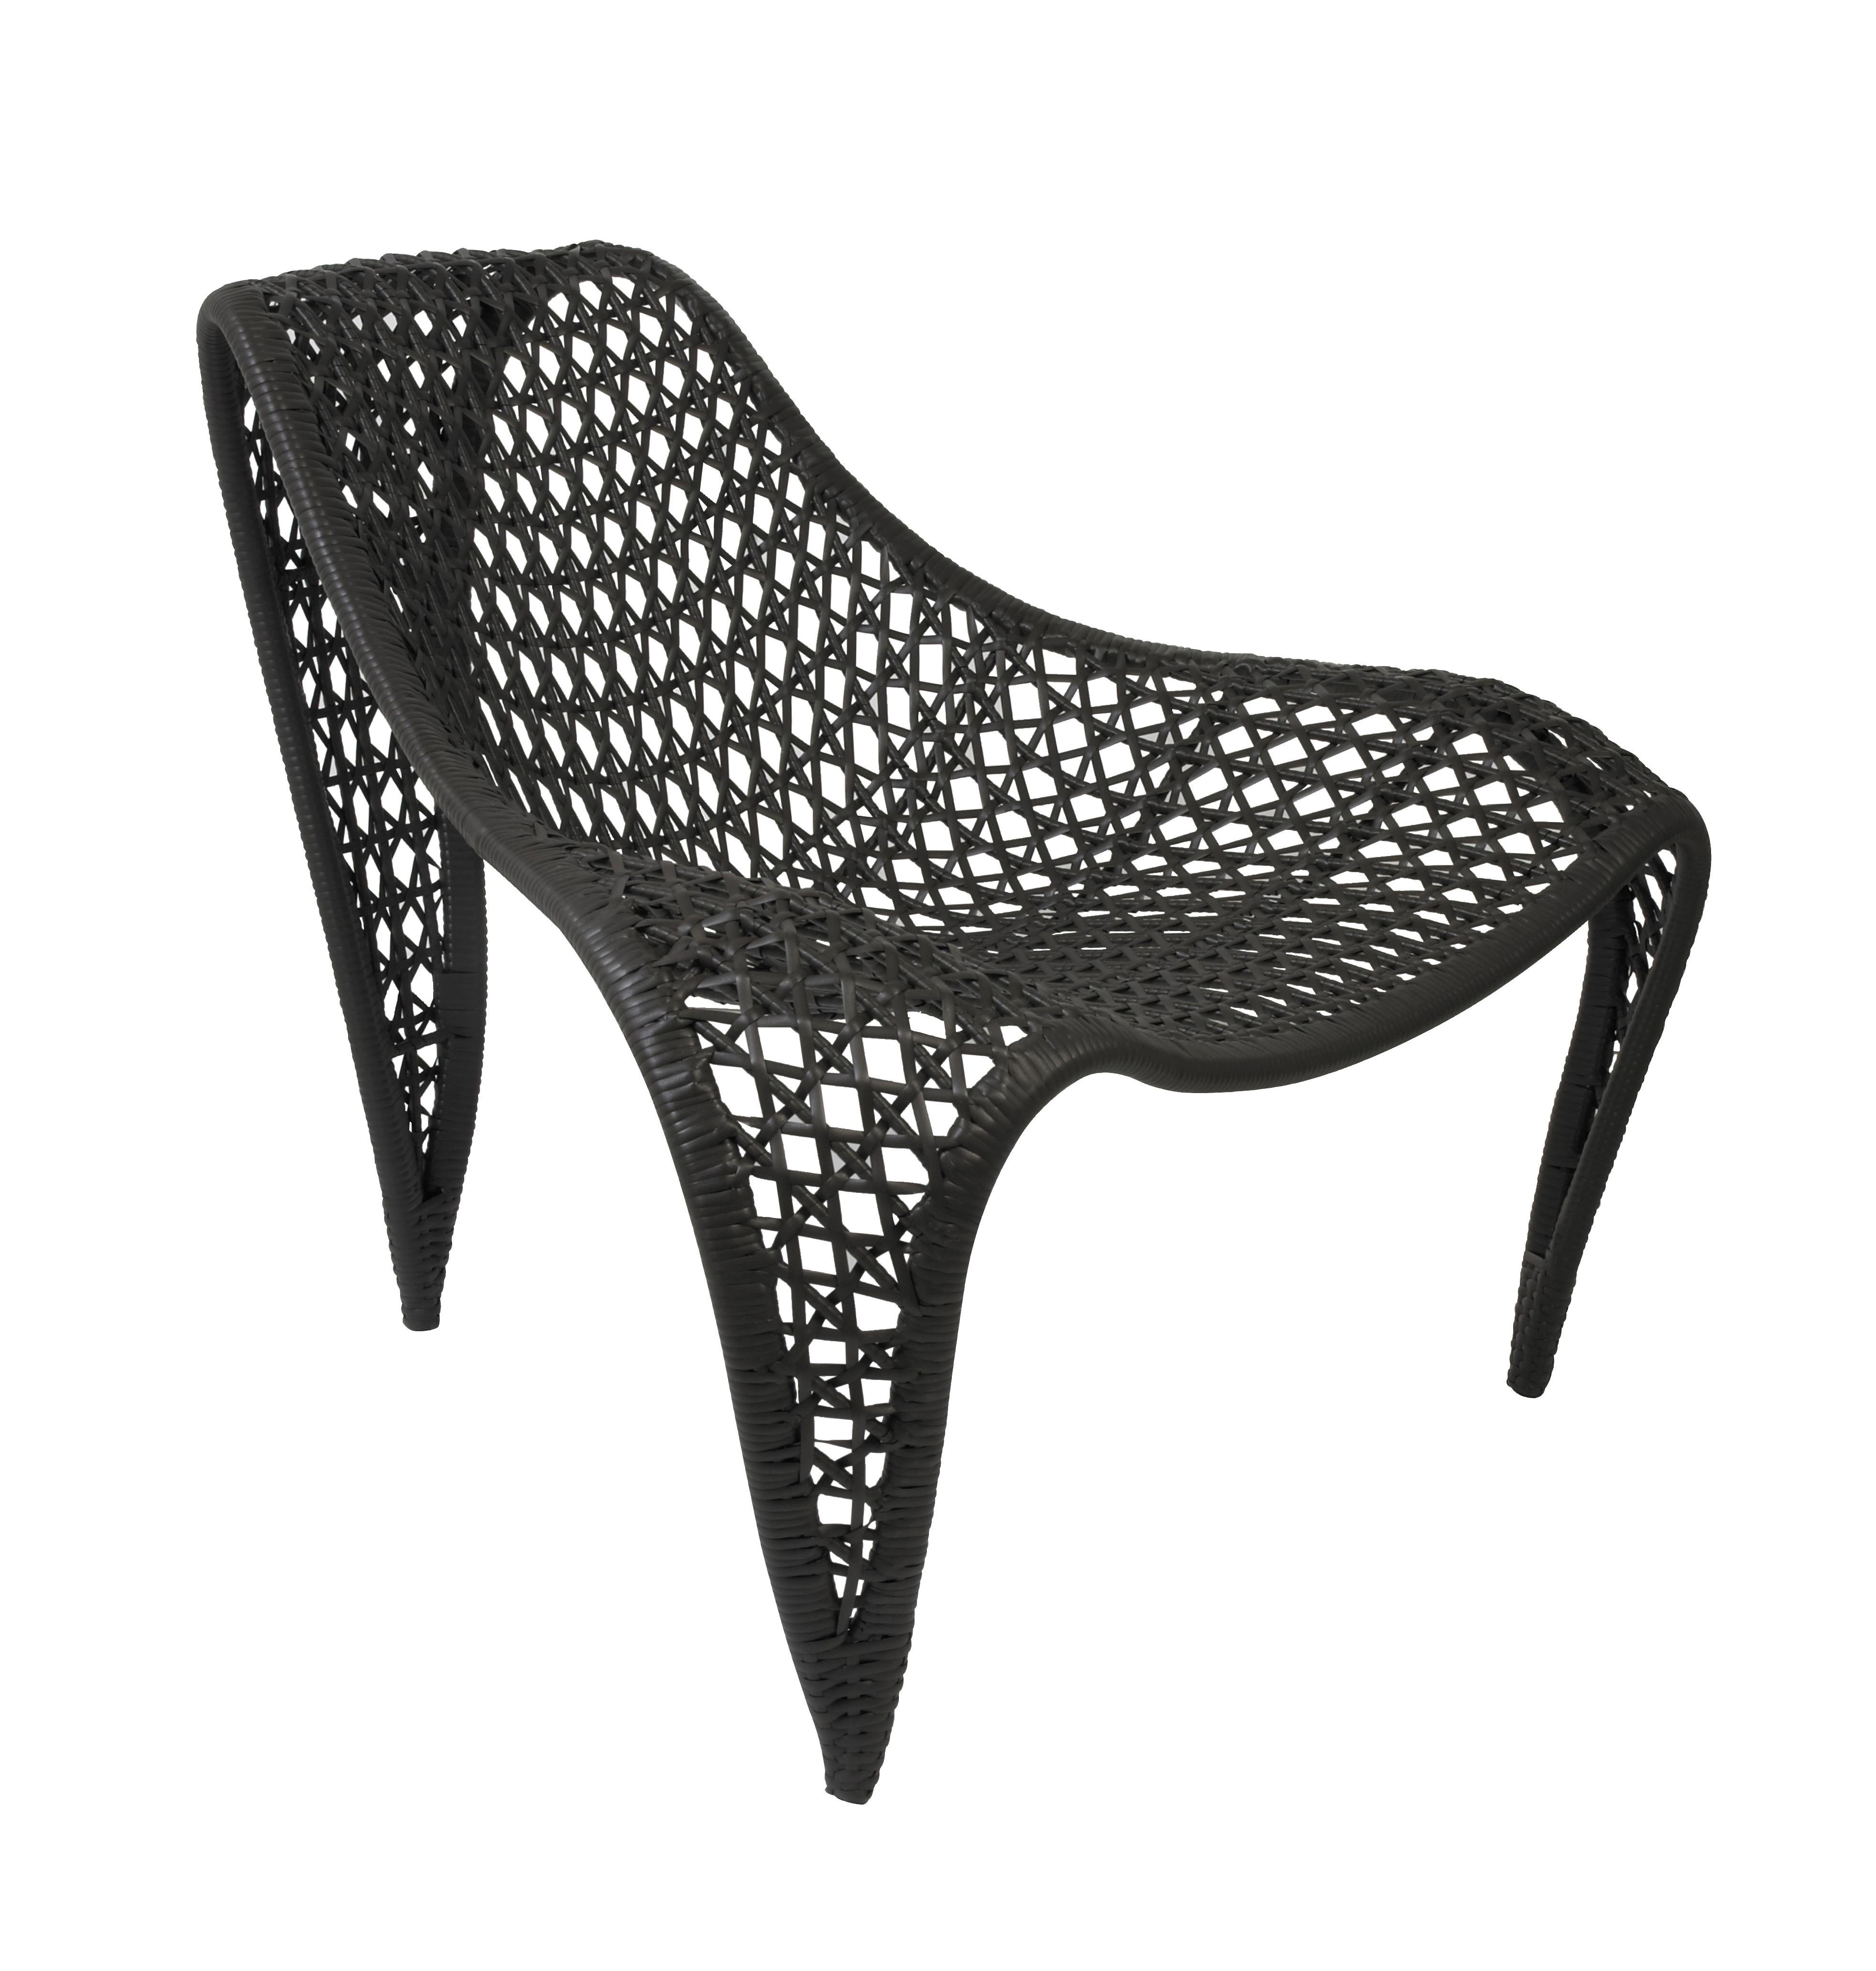 Philippine Wing Open Weave Saddle Leather Chair For Sale